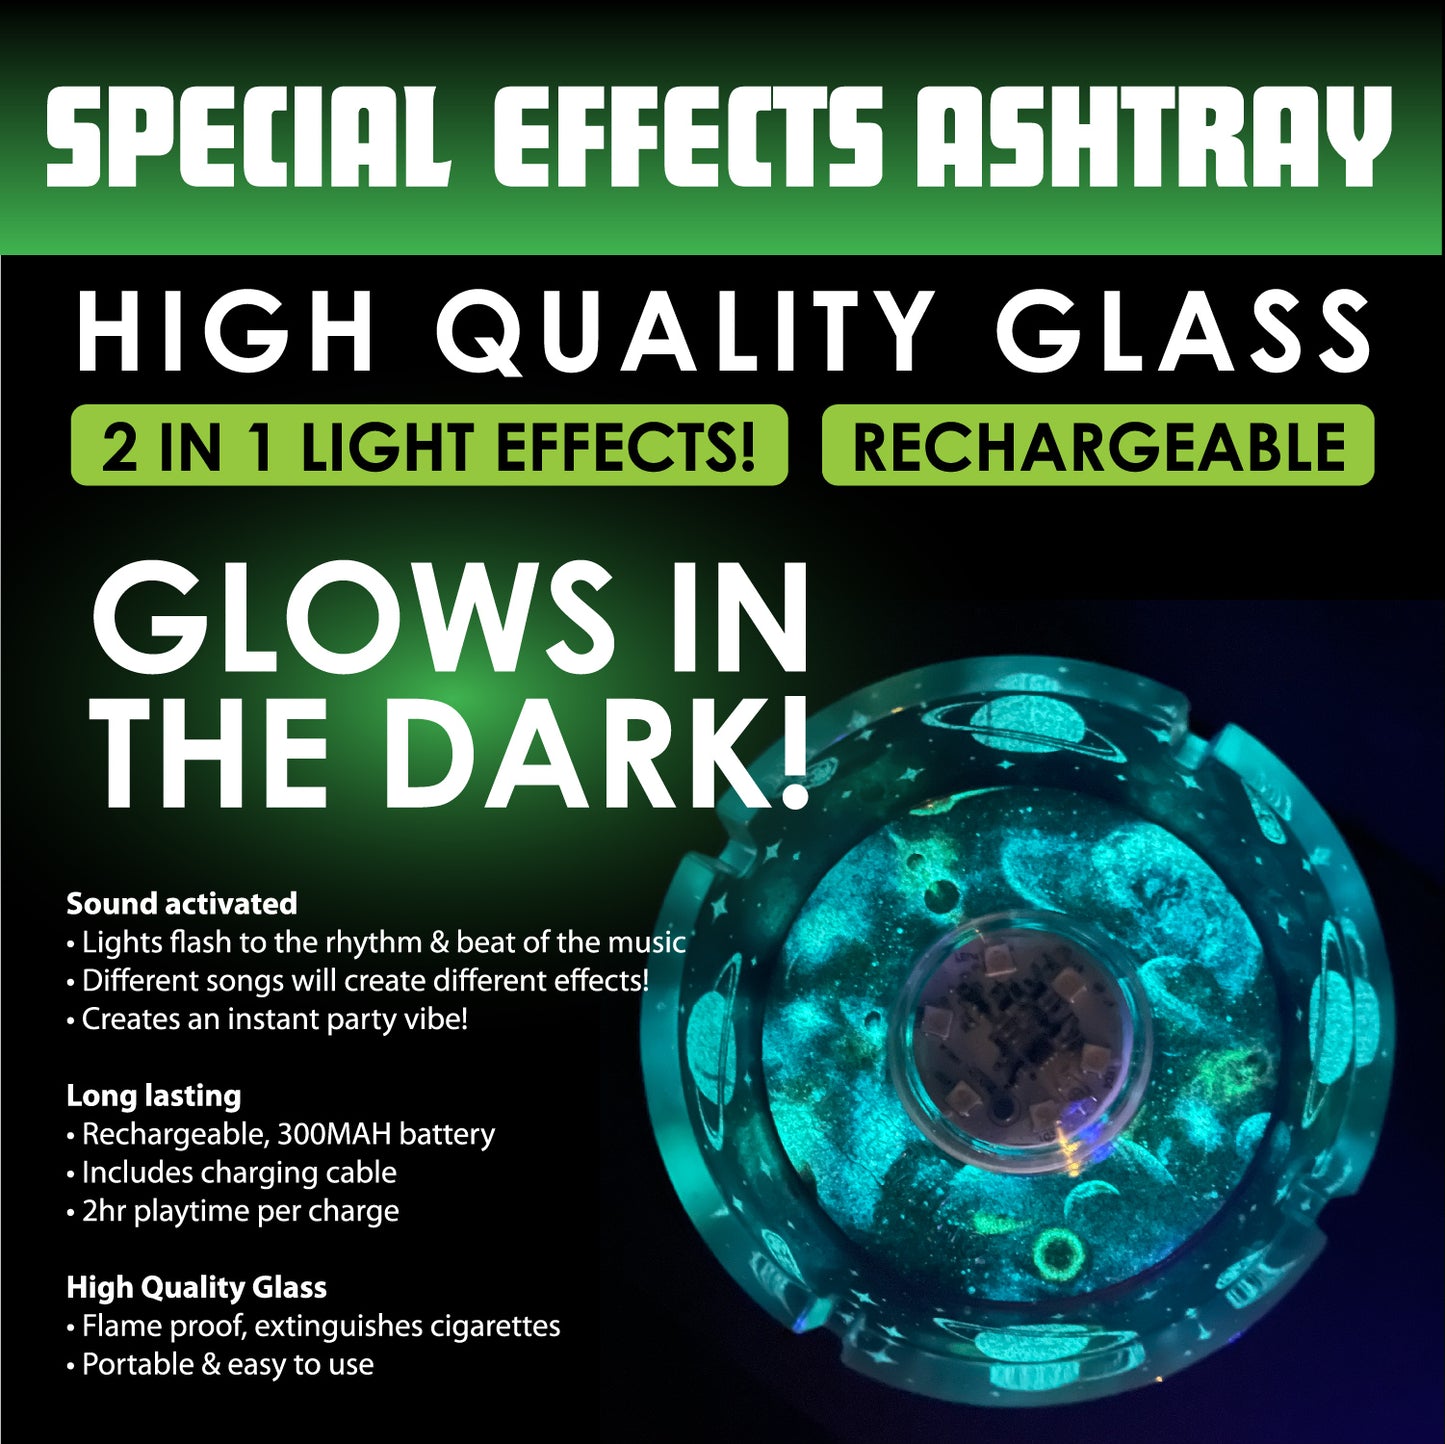 ITEM NUMBER 023744 SPECIAL EFFECTS GLASS ASHTRAY 6 PIECES PER DISPLAY